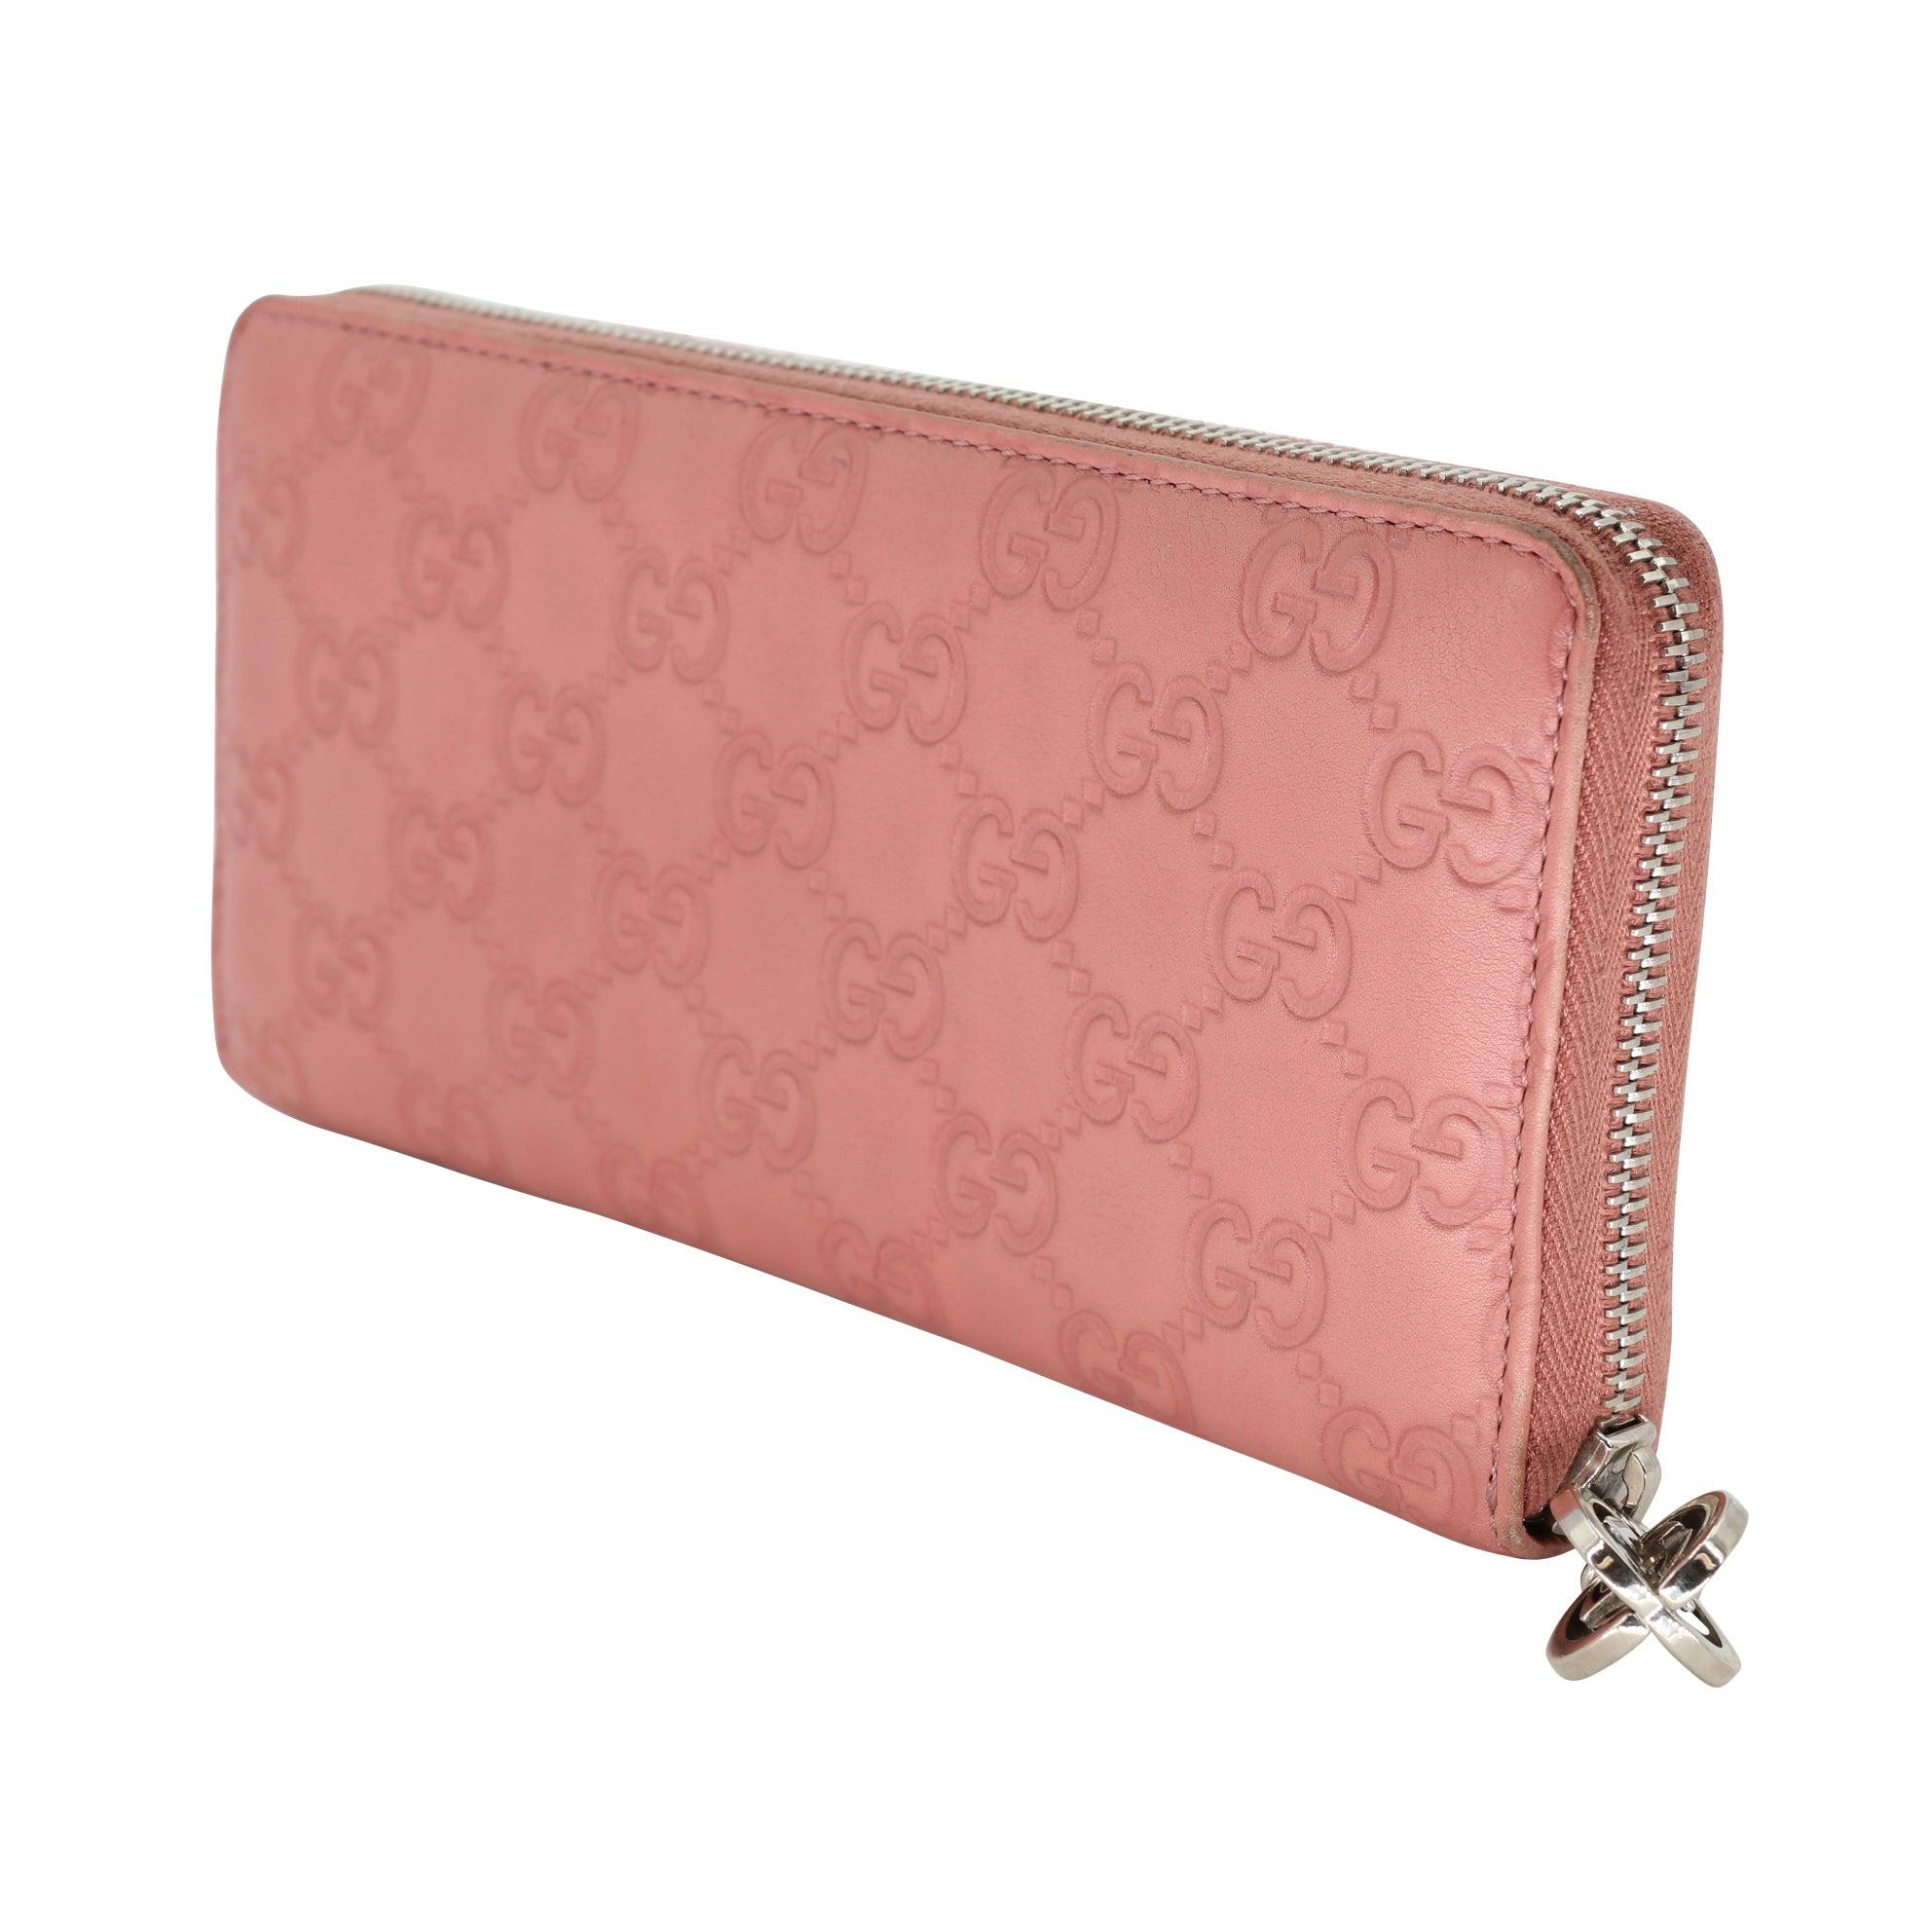 The Italian fashion house of Gucci continues to reinterpret its rich heritage with decidedly modern, yet classic designs. This wallet features the signature GG monogram all over print with elegant chrome detail. Wallet is in pre-loved condition with